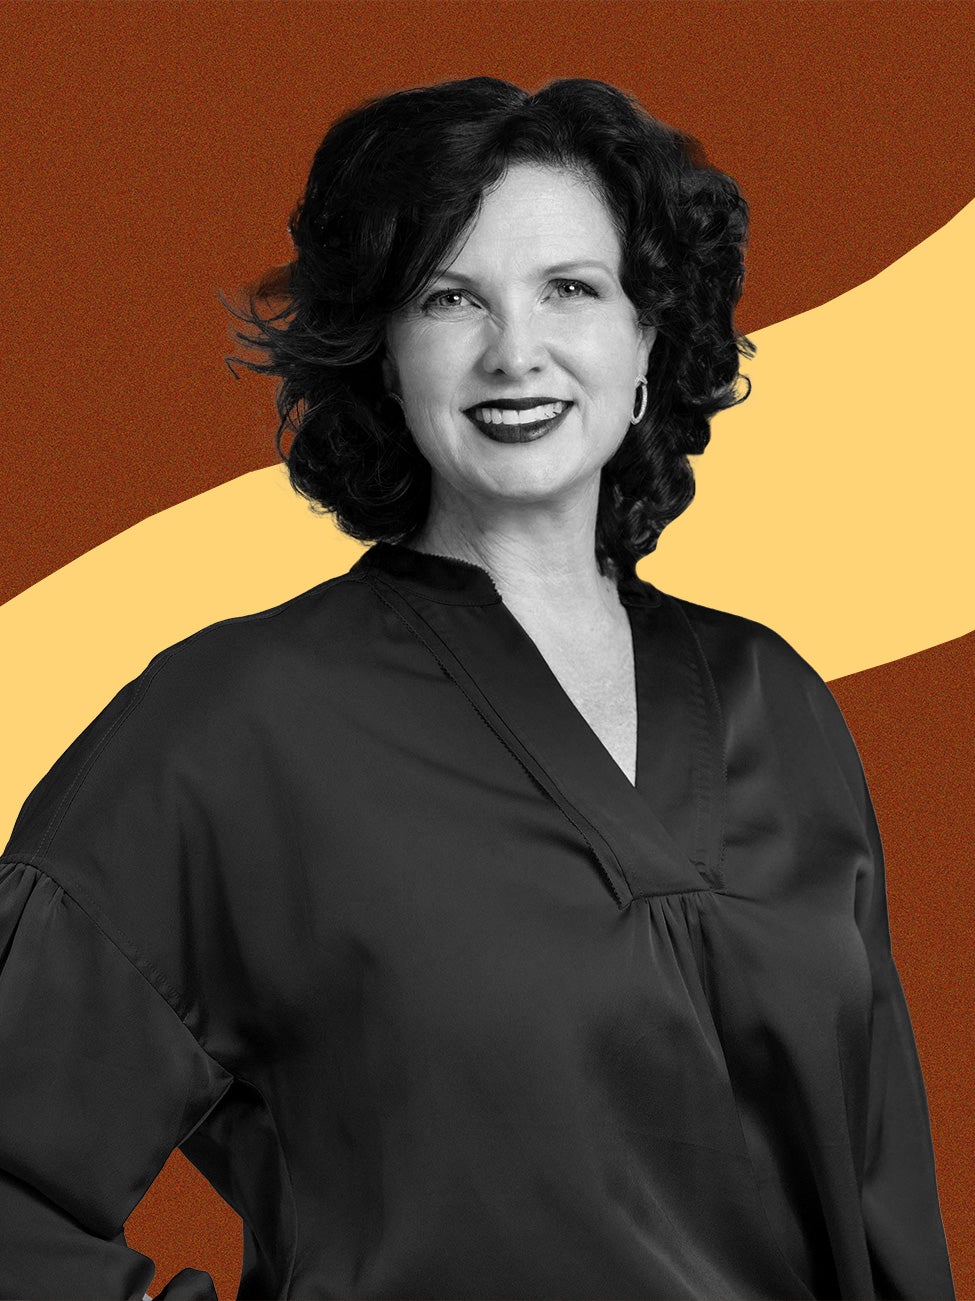 A black and white photo of Kathy Baughman McLeod cut out on top of an orange-speckled background with a light yellow swoosh line behind her.